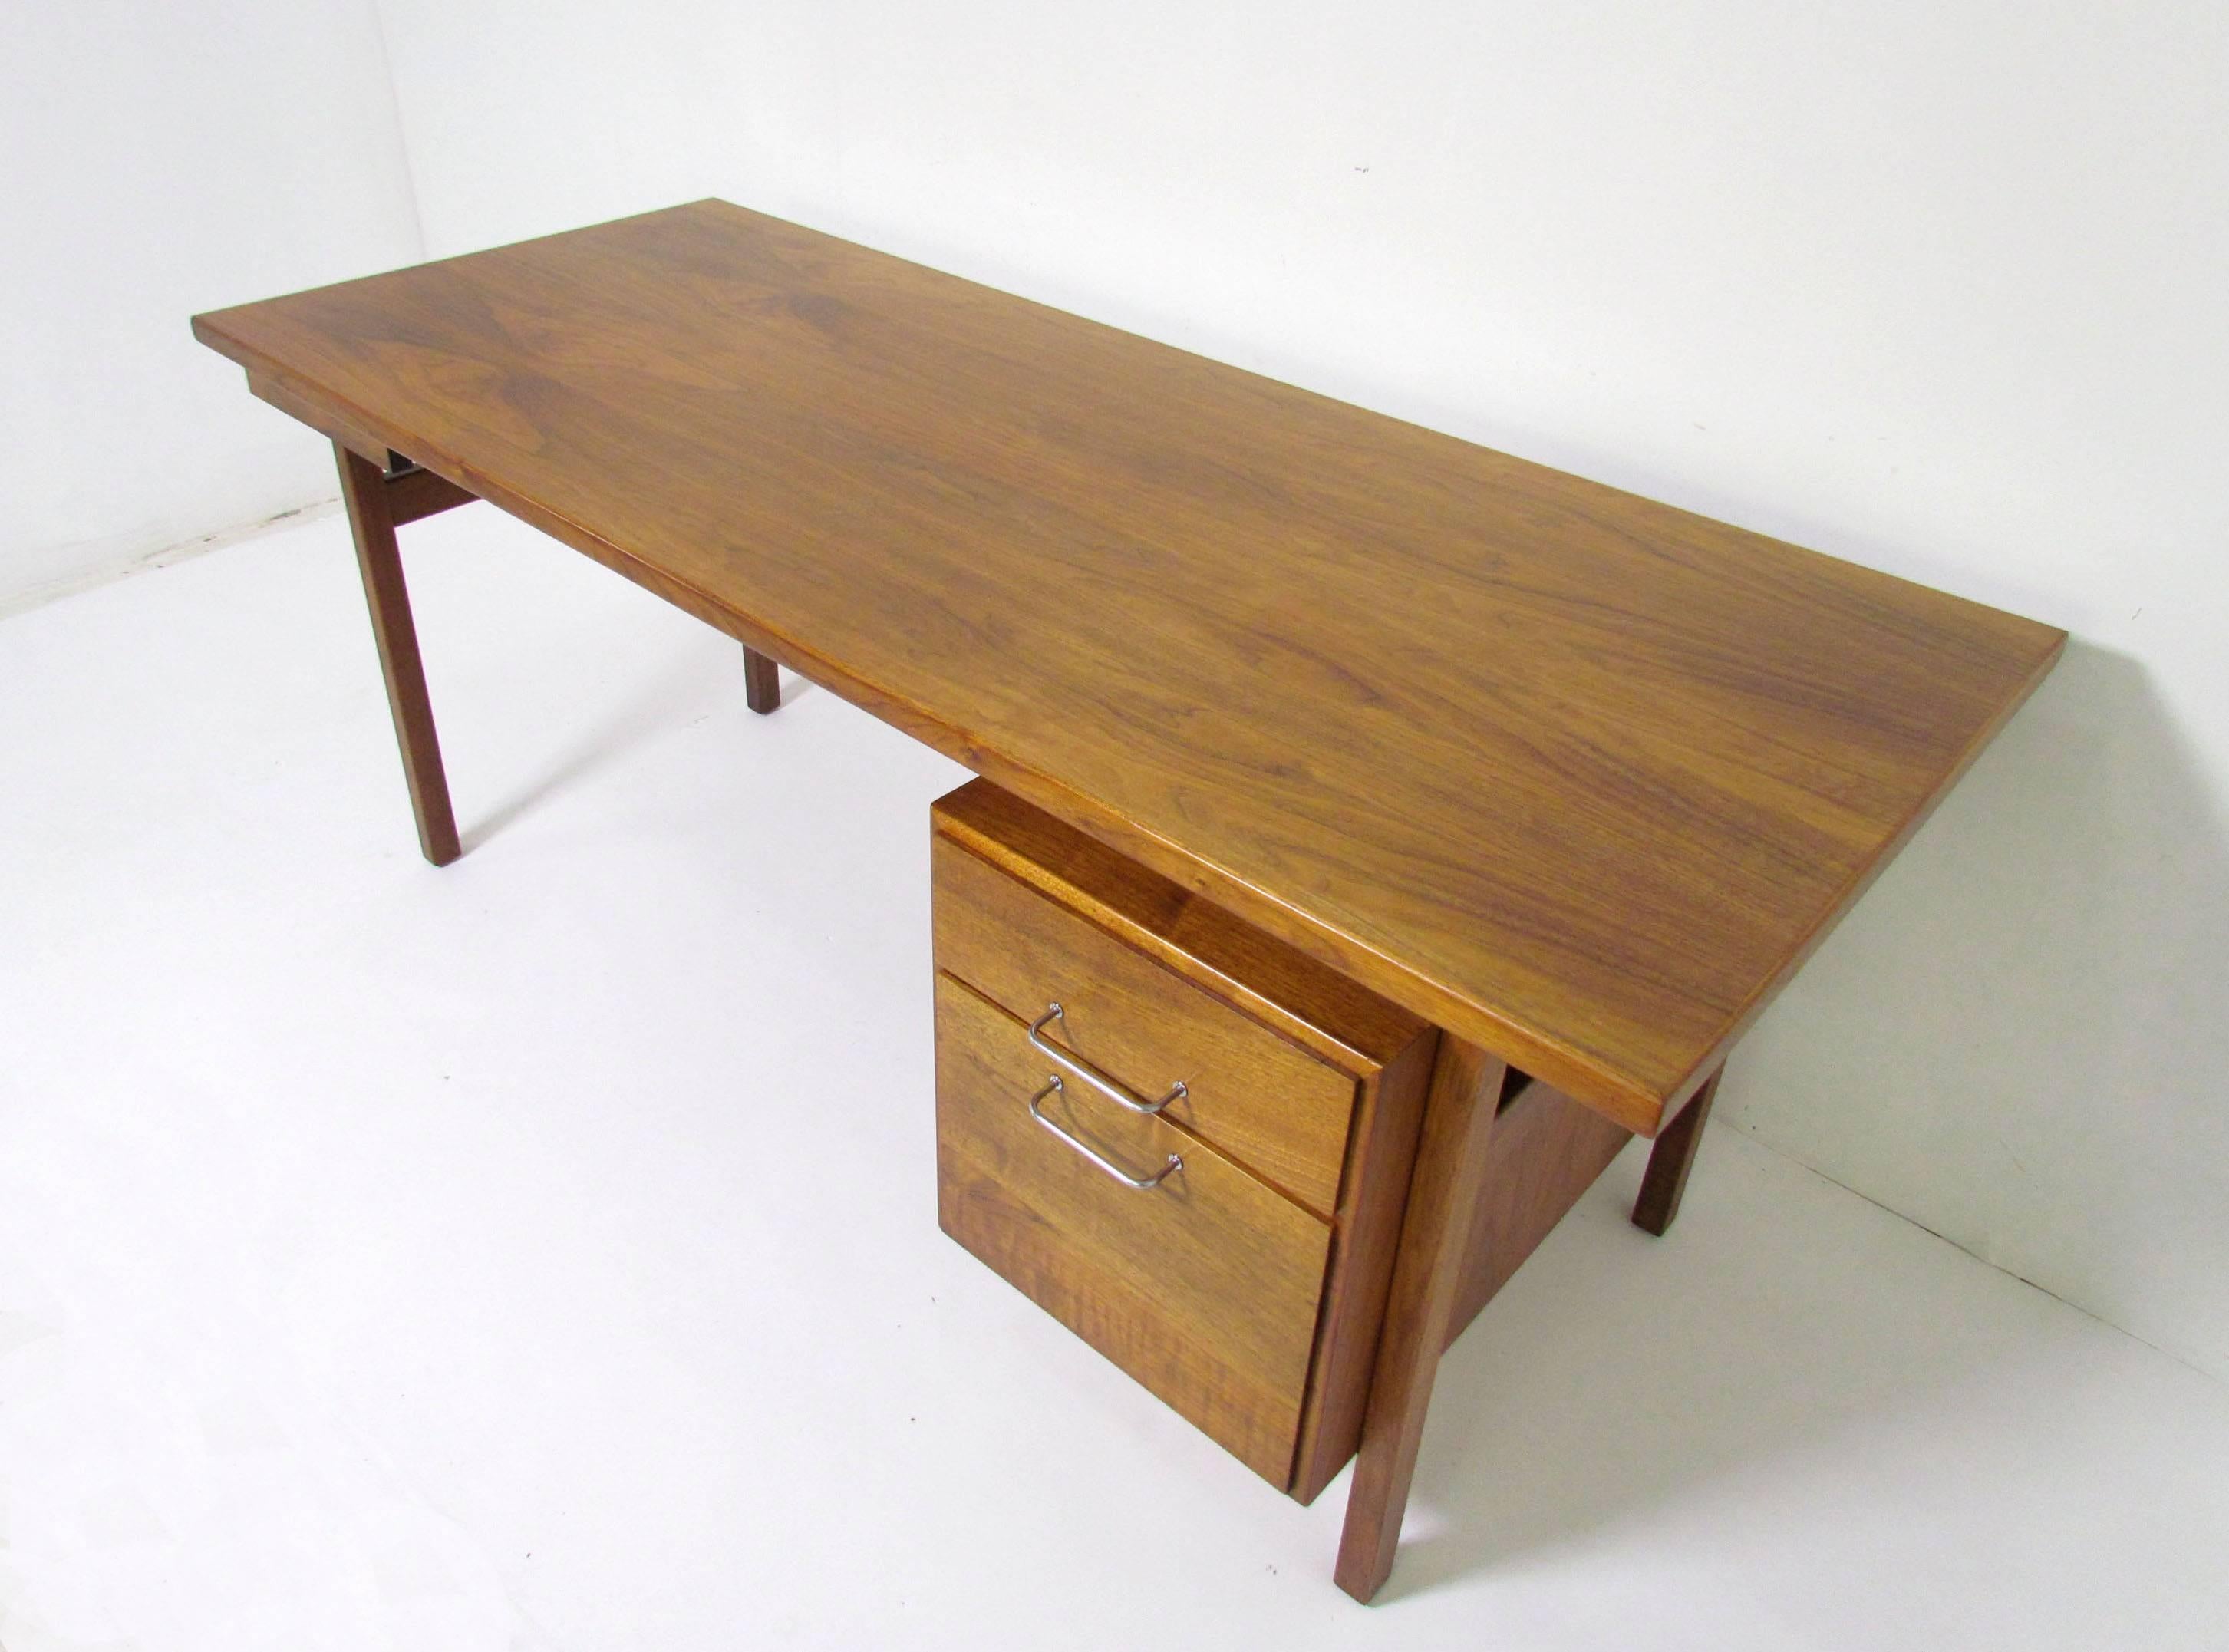 Mid-Century Modern work station desk in walnut by Jens Risom, circa 1960s, with optional (removable) return that mounts to left of seat. Bank of drawers on right include pencil organizer and a deep drawer for hanging files.

Desk measures 72